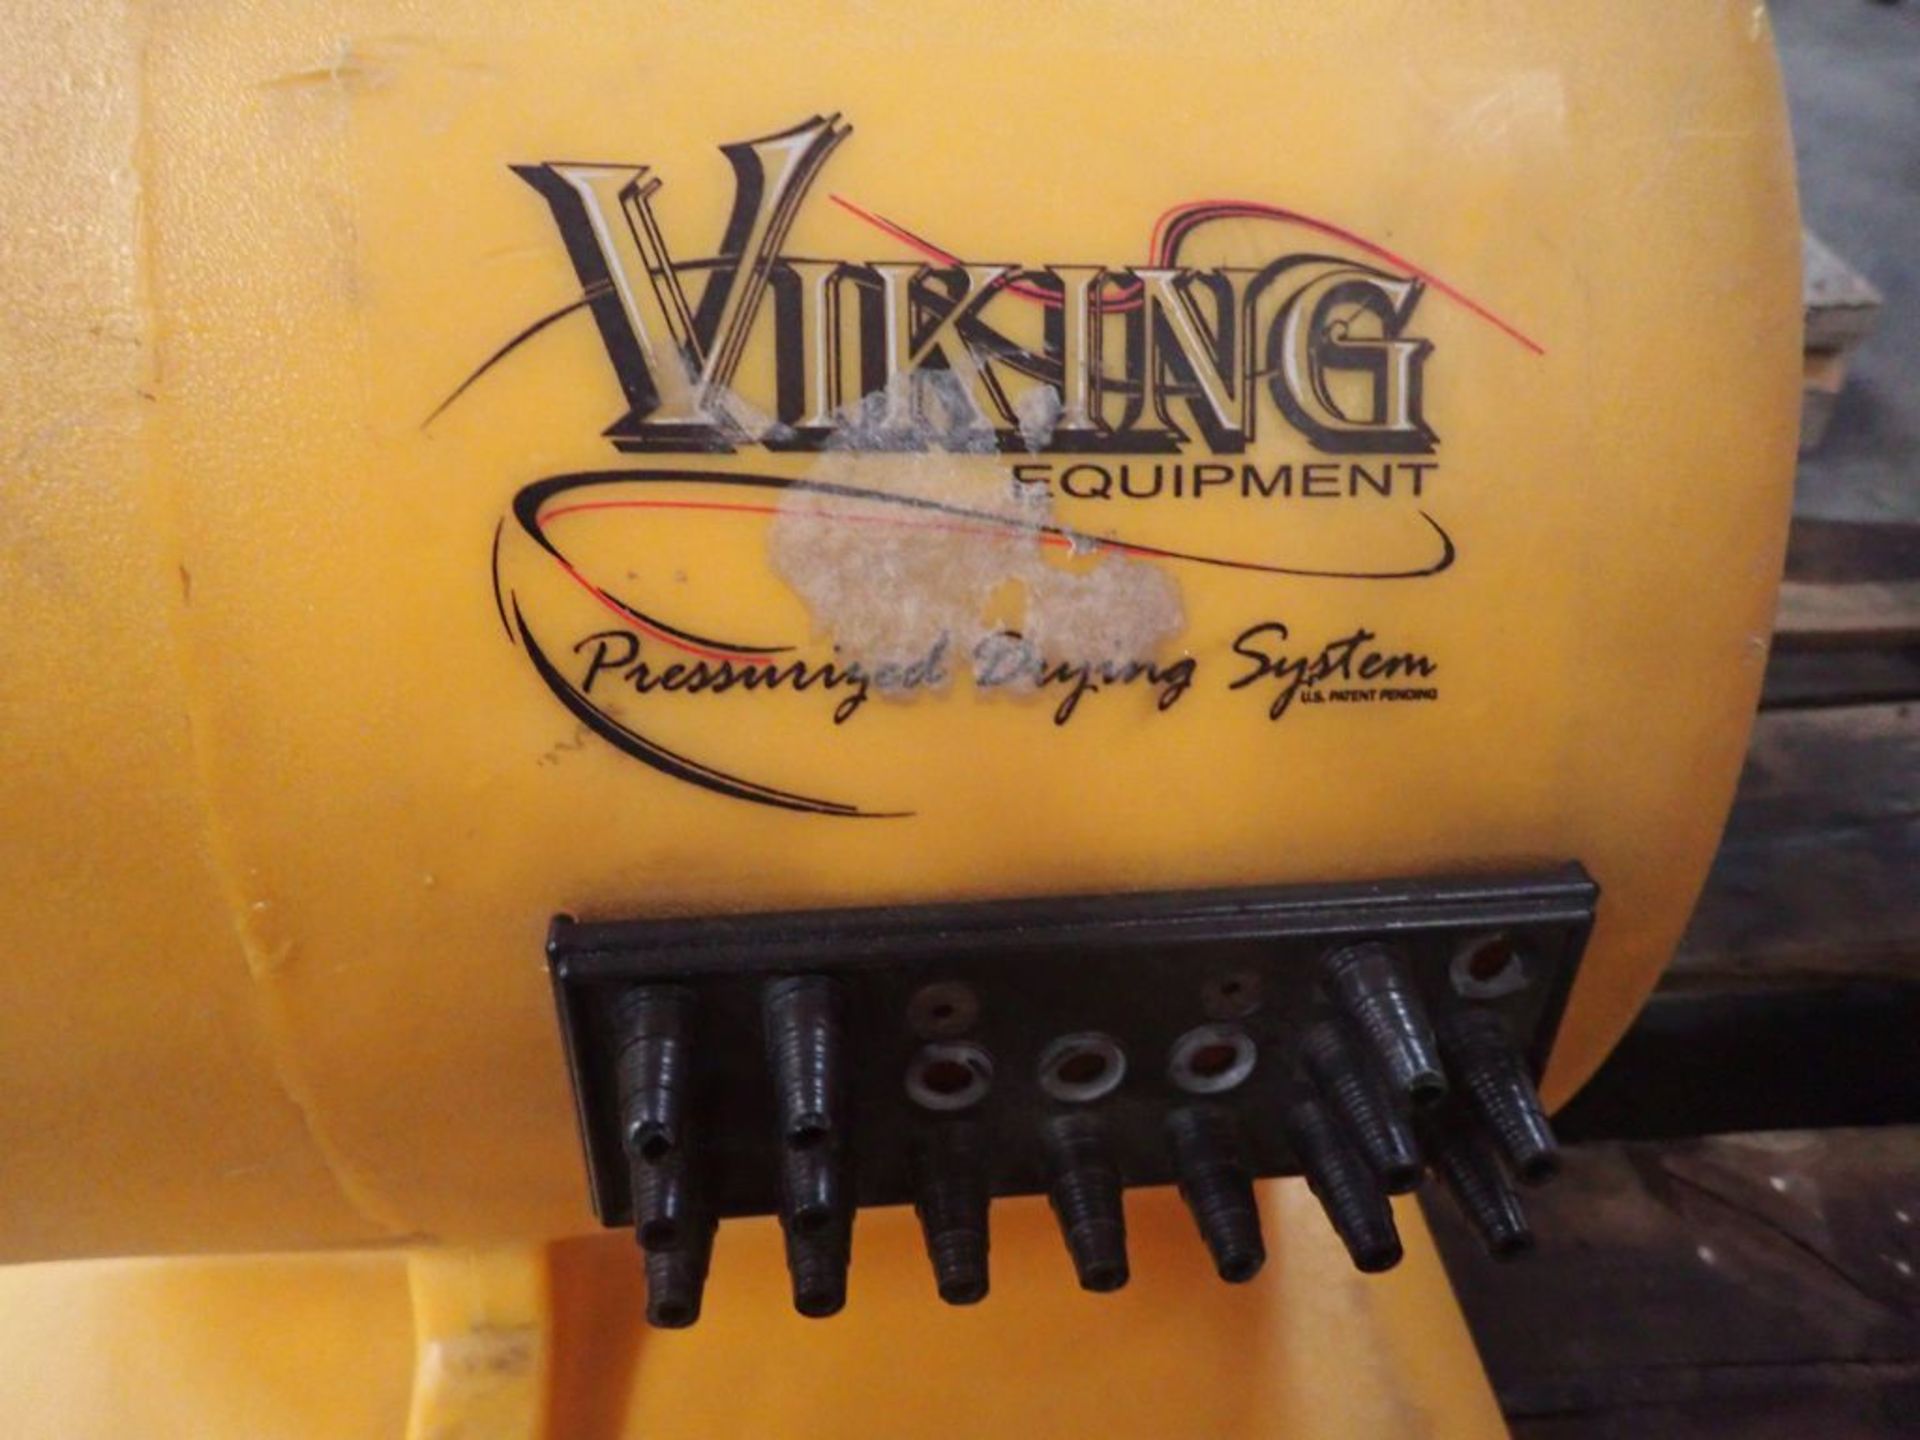 Lot of (2) Viking Equipment Pressurized Drying Systems - Image 5 of 10